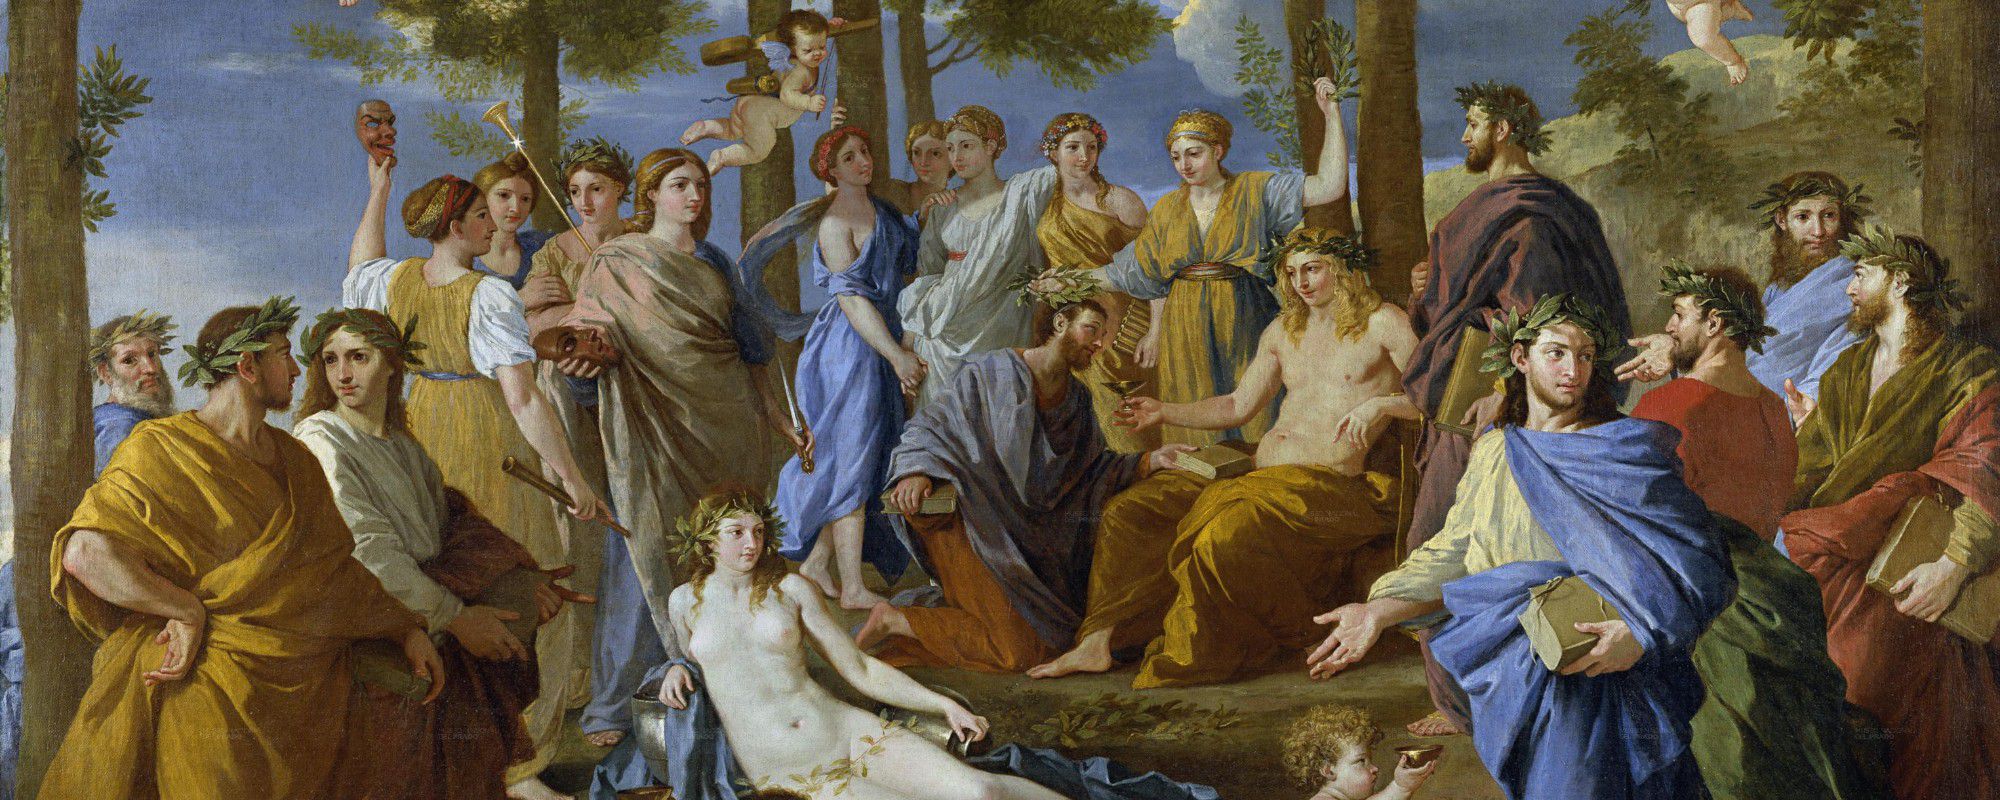 Which Greek god will claim you at Camp Half-Blood?